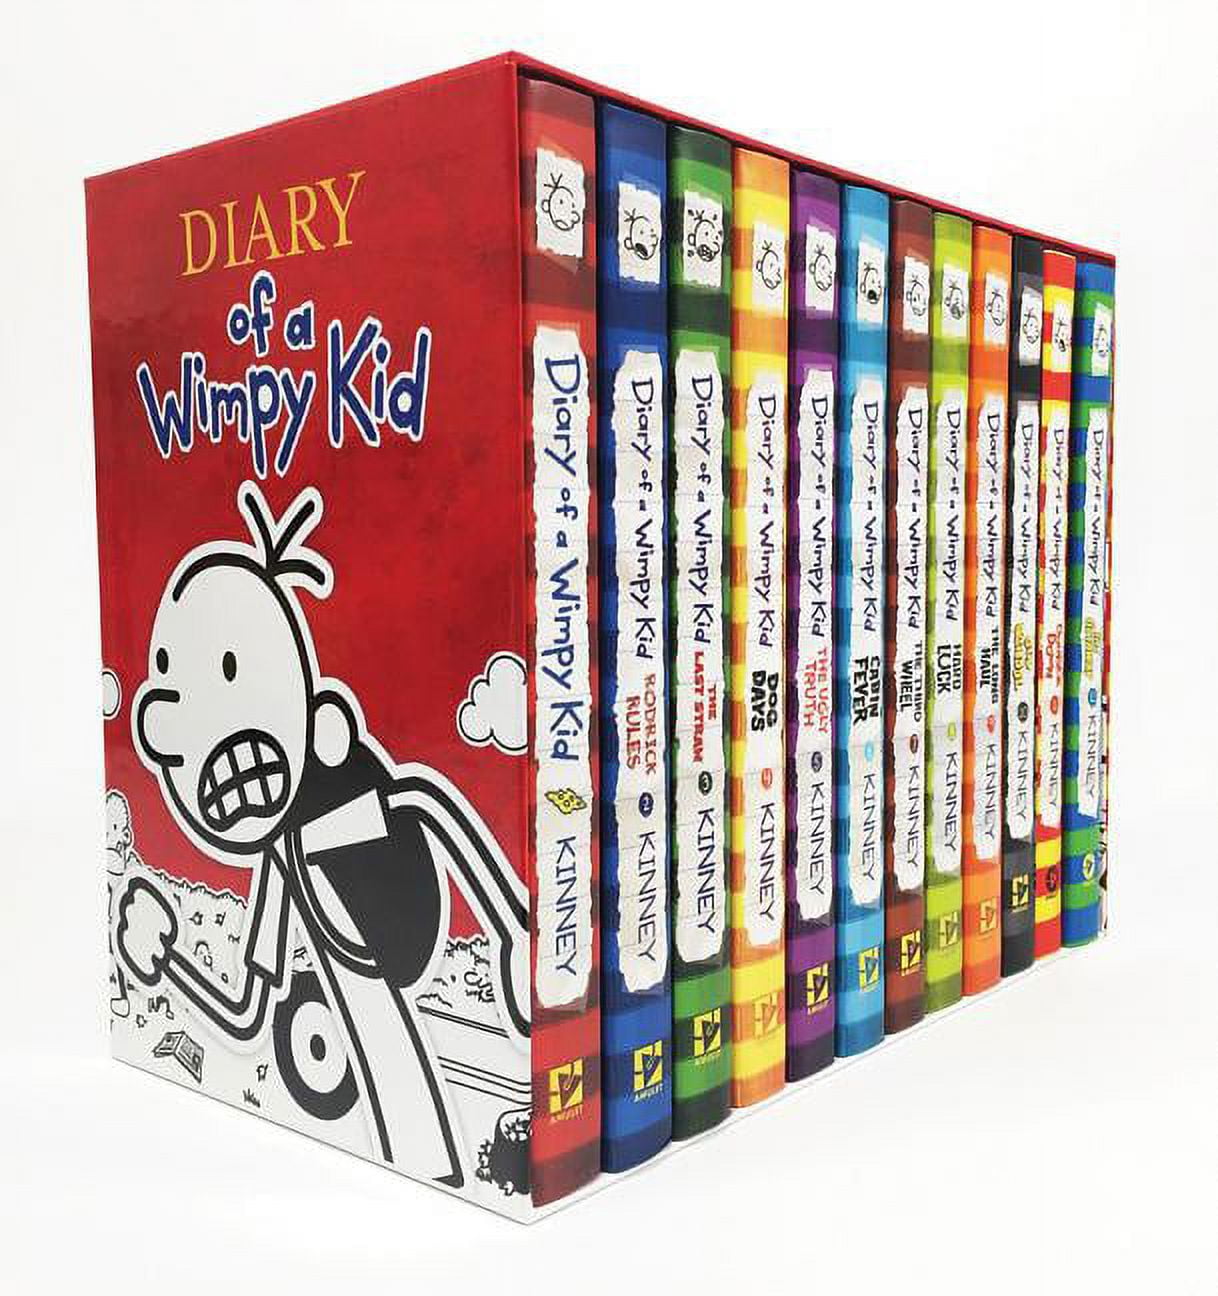 of　Diary　Kid　(1-12)　Books　Wimpy　of　Wimpy　a　Box　a　of　Kid:　Diary　(Other)